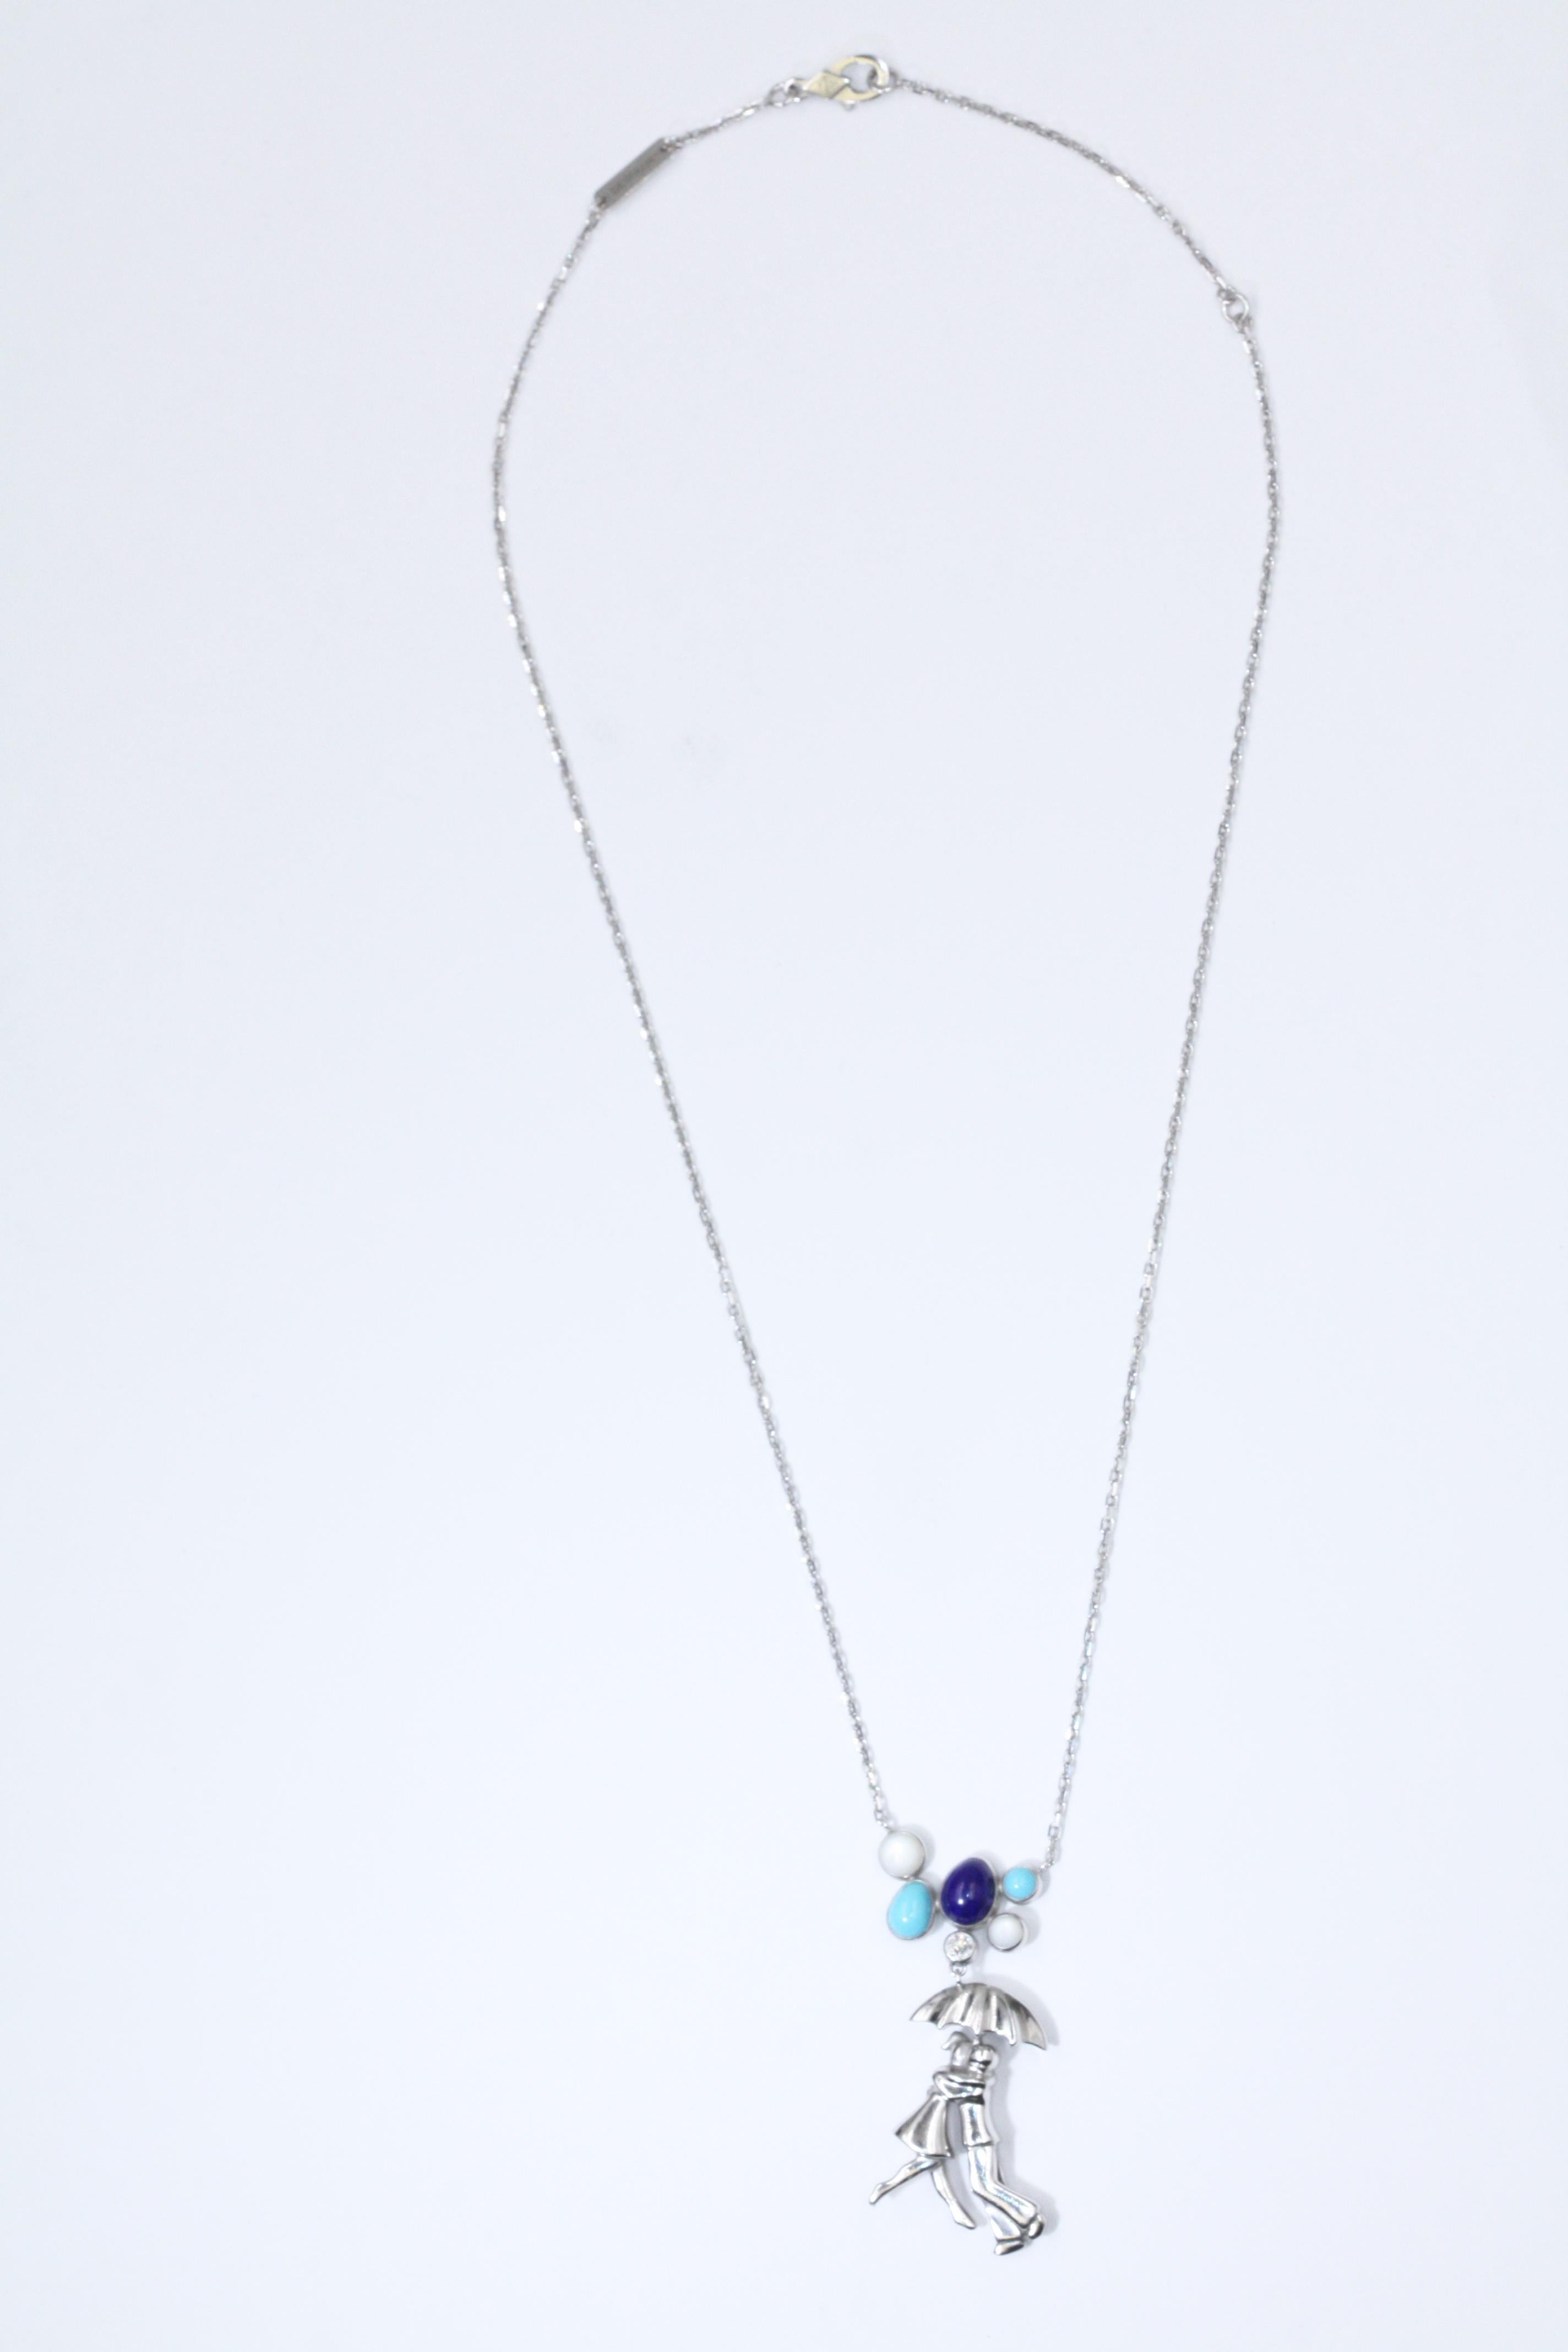 A beautiful necklace from Van Cleef & Arpels Romance a Paris Collection, named A DAY IN PARIS Necklace.
The necklace is made in 18k white gold, set with a round diamond
precious stone:Lapis Lazuli, Turquoise, diamond
pendent size:4cm (2.8cm white